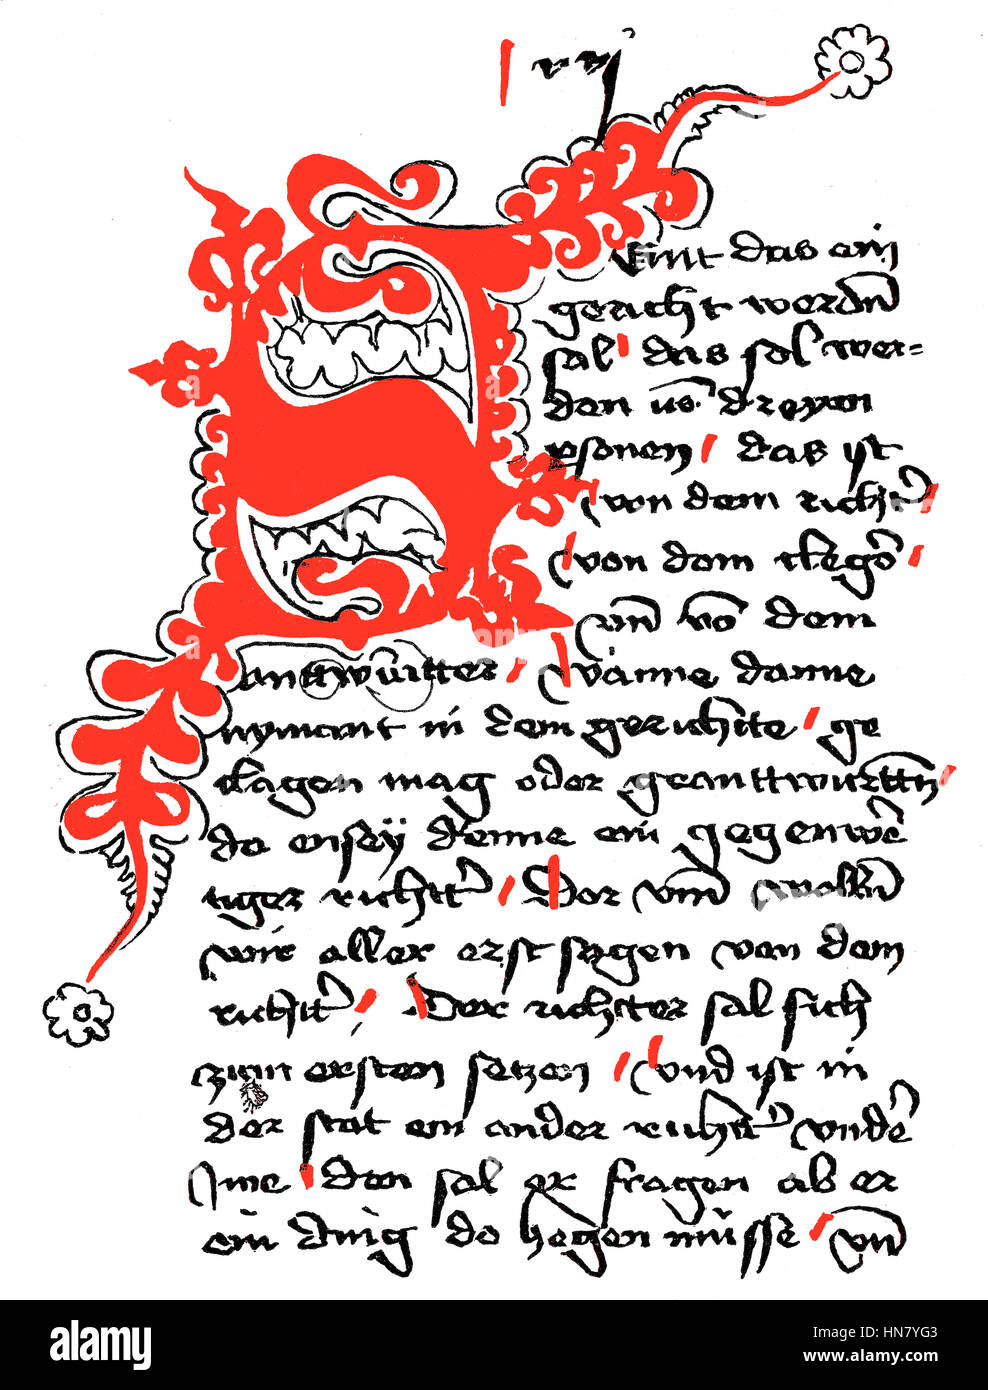 Facsimile of a certificate of Medieval legal order, Germany, Westphalia, 1405 Stock Photo